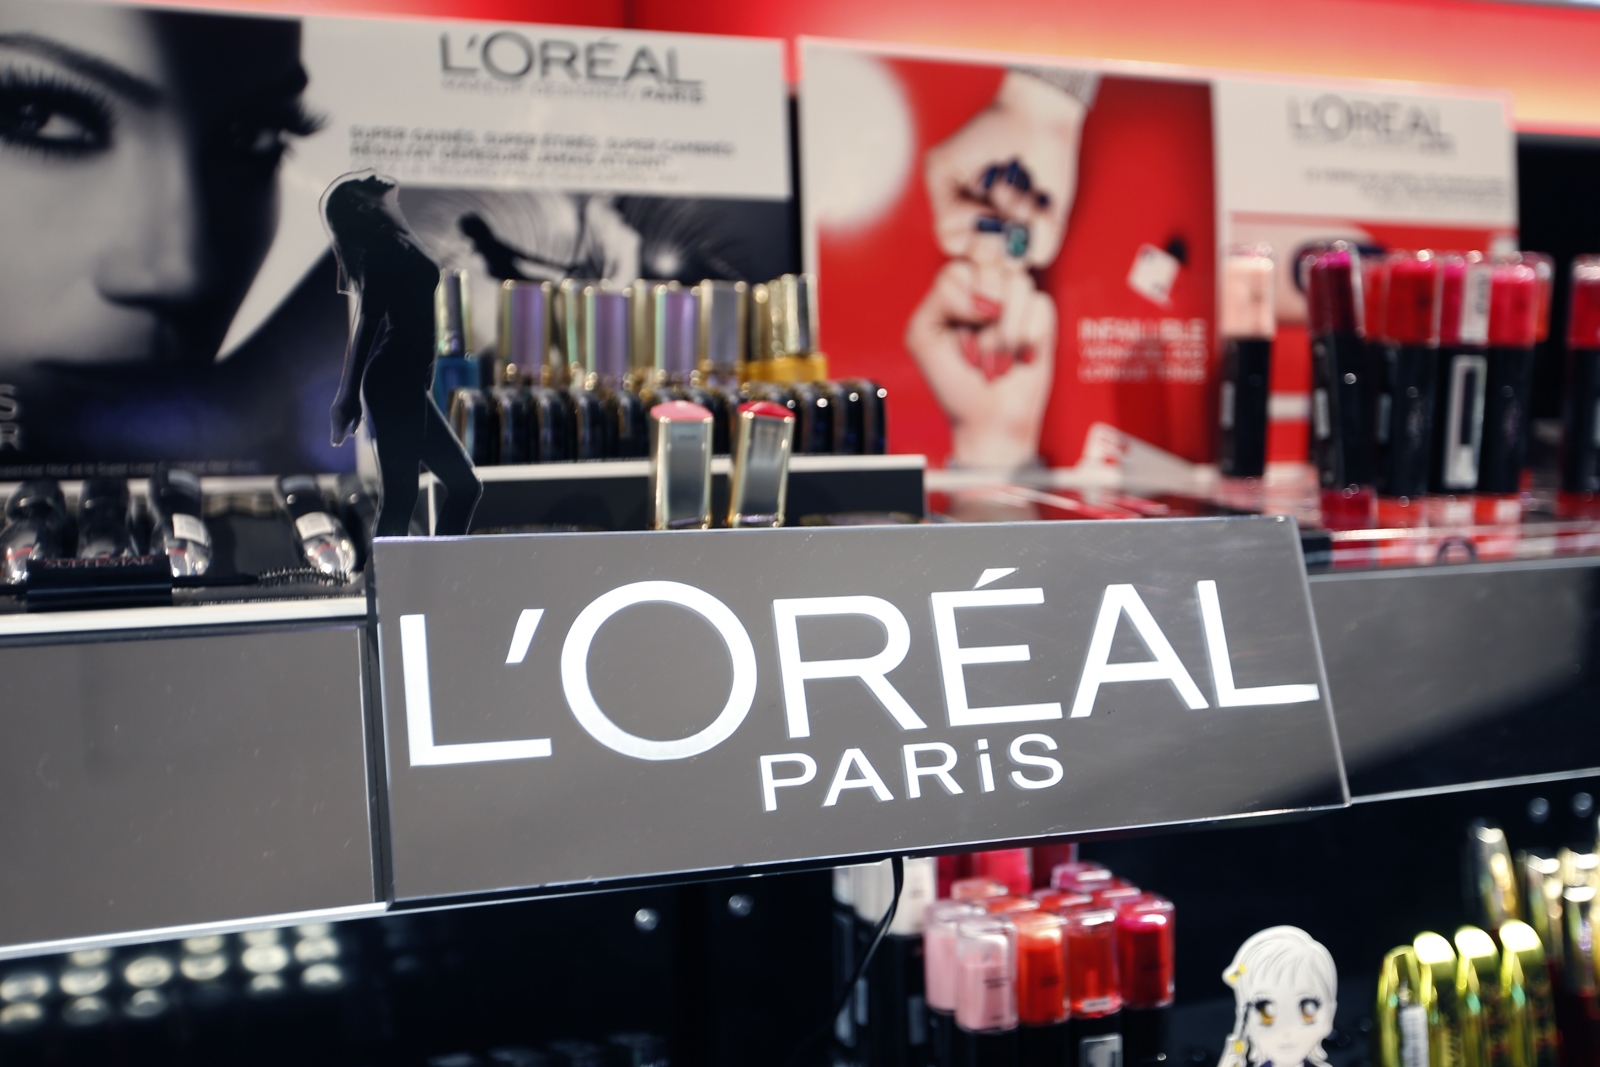 L'Oreal, the parent of L'Oreal Paris and owner of 30 beauty brands, is partnering with Organovo to create 3D printed human tissue to test its products on